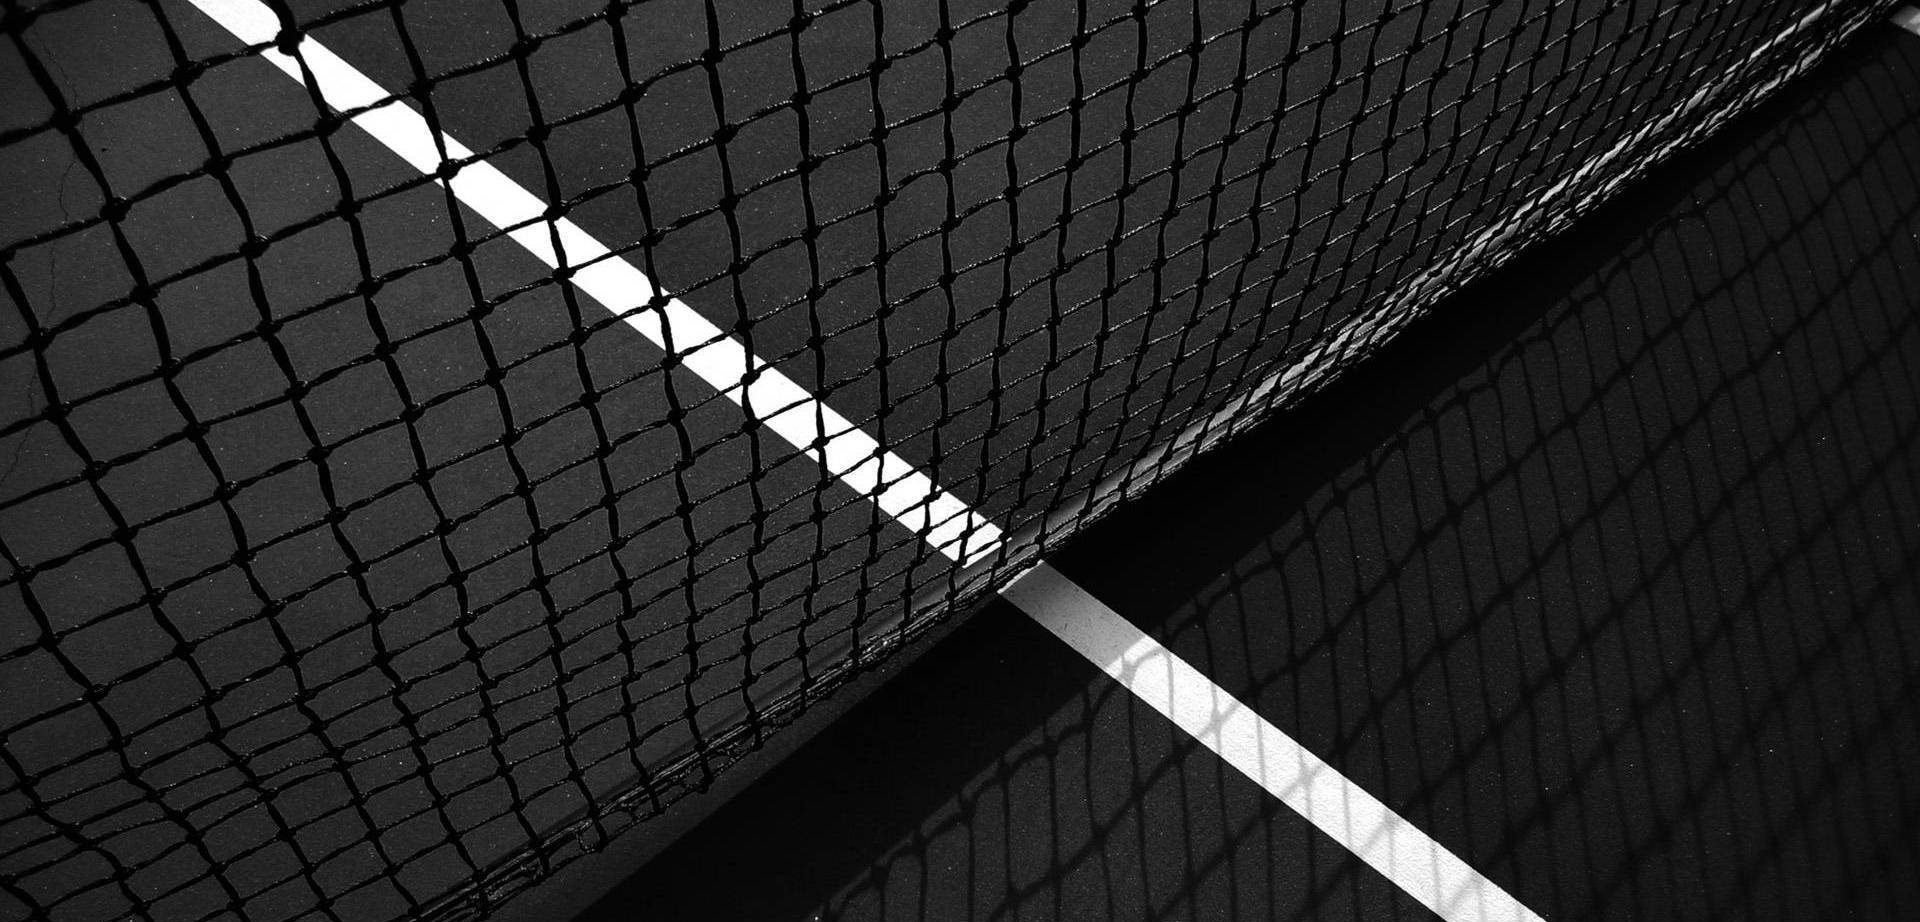 Tennis HD Wallpaper Background Of Your Choice